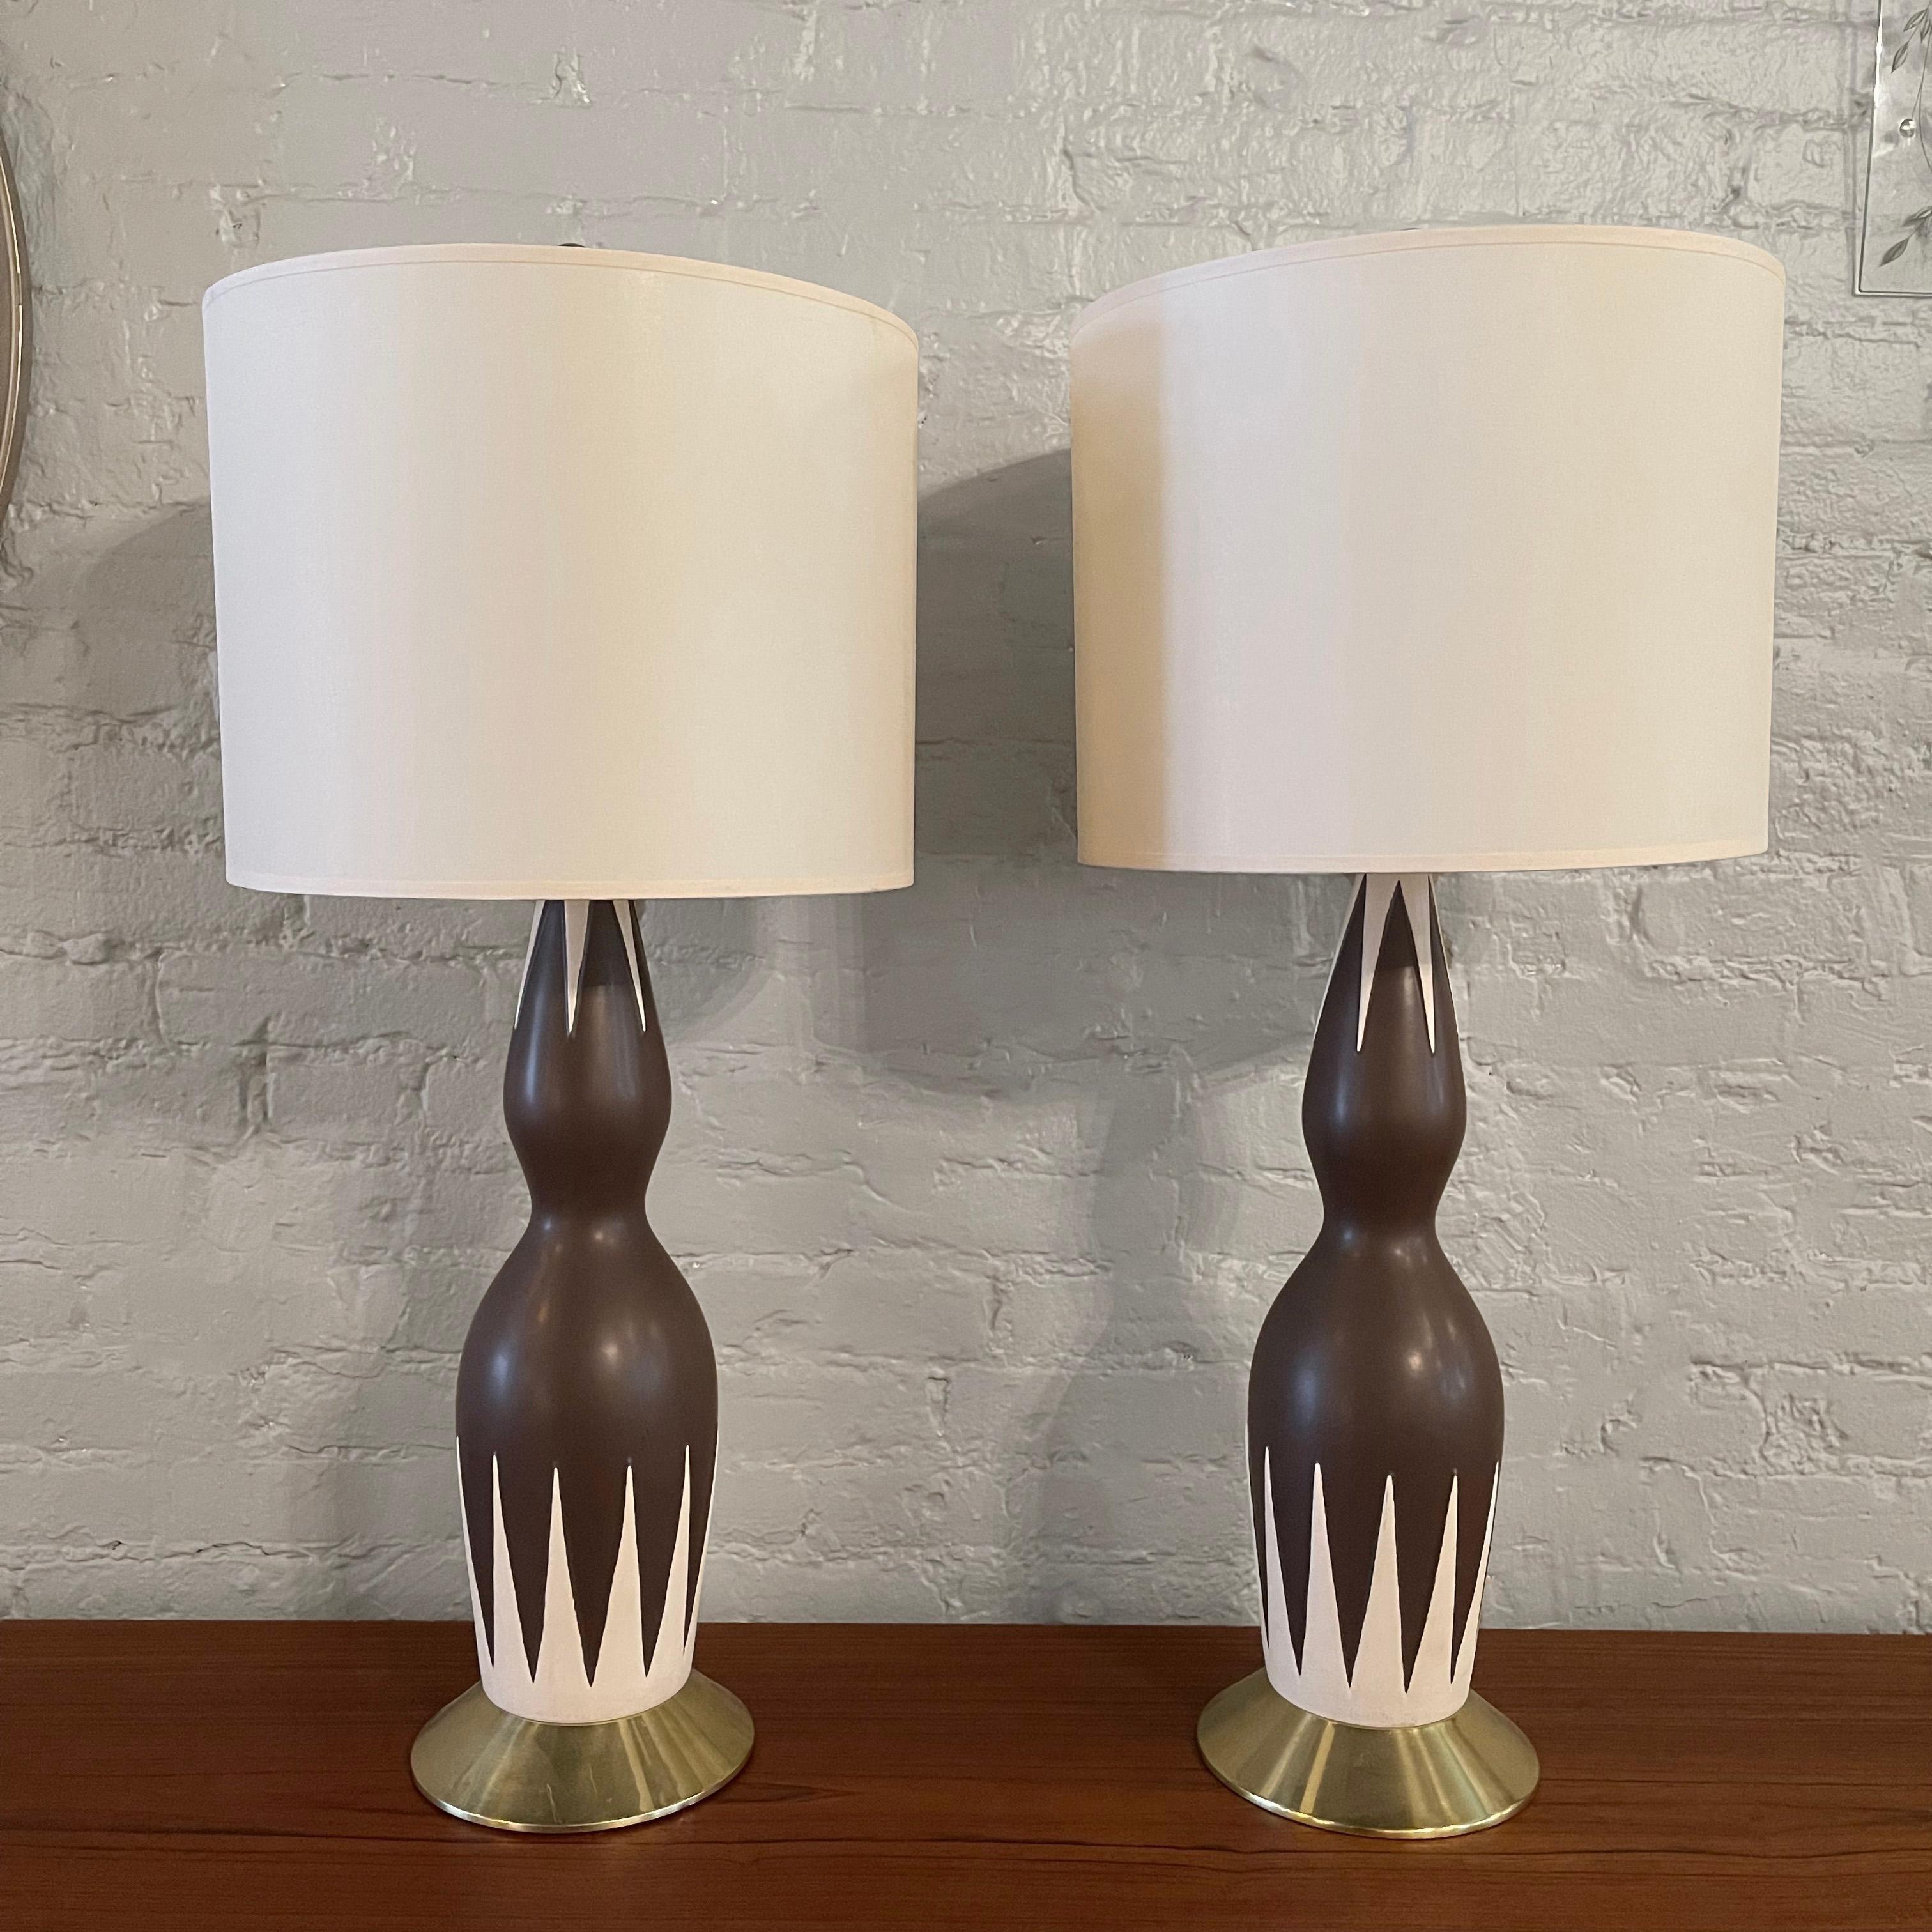 American Mid-Century Modern Hourglass Table Lamps by Gerald Thurston For Sale